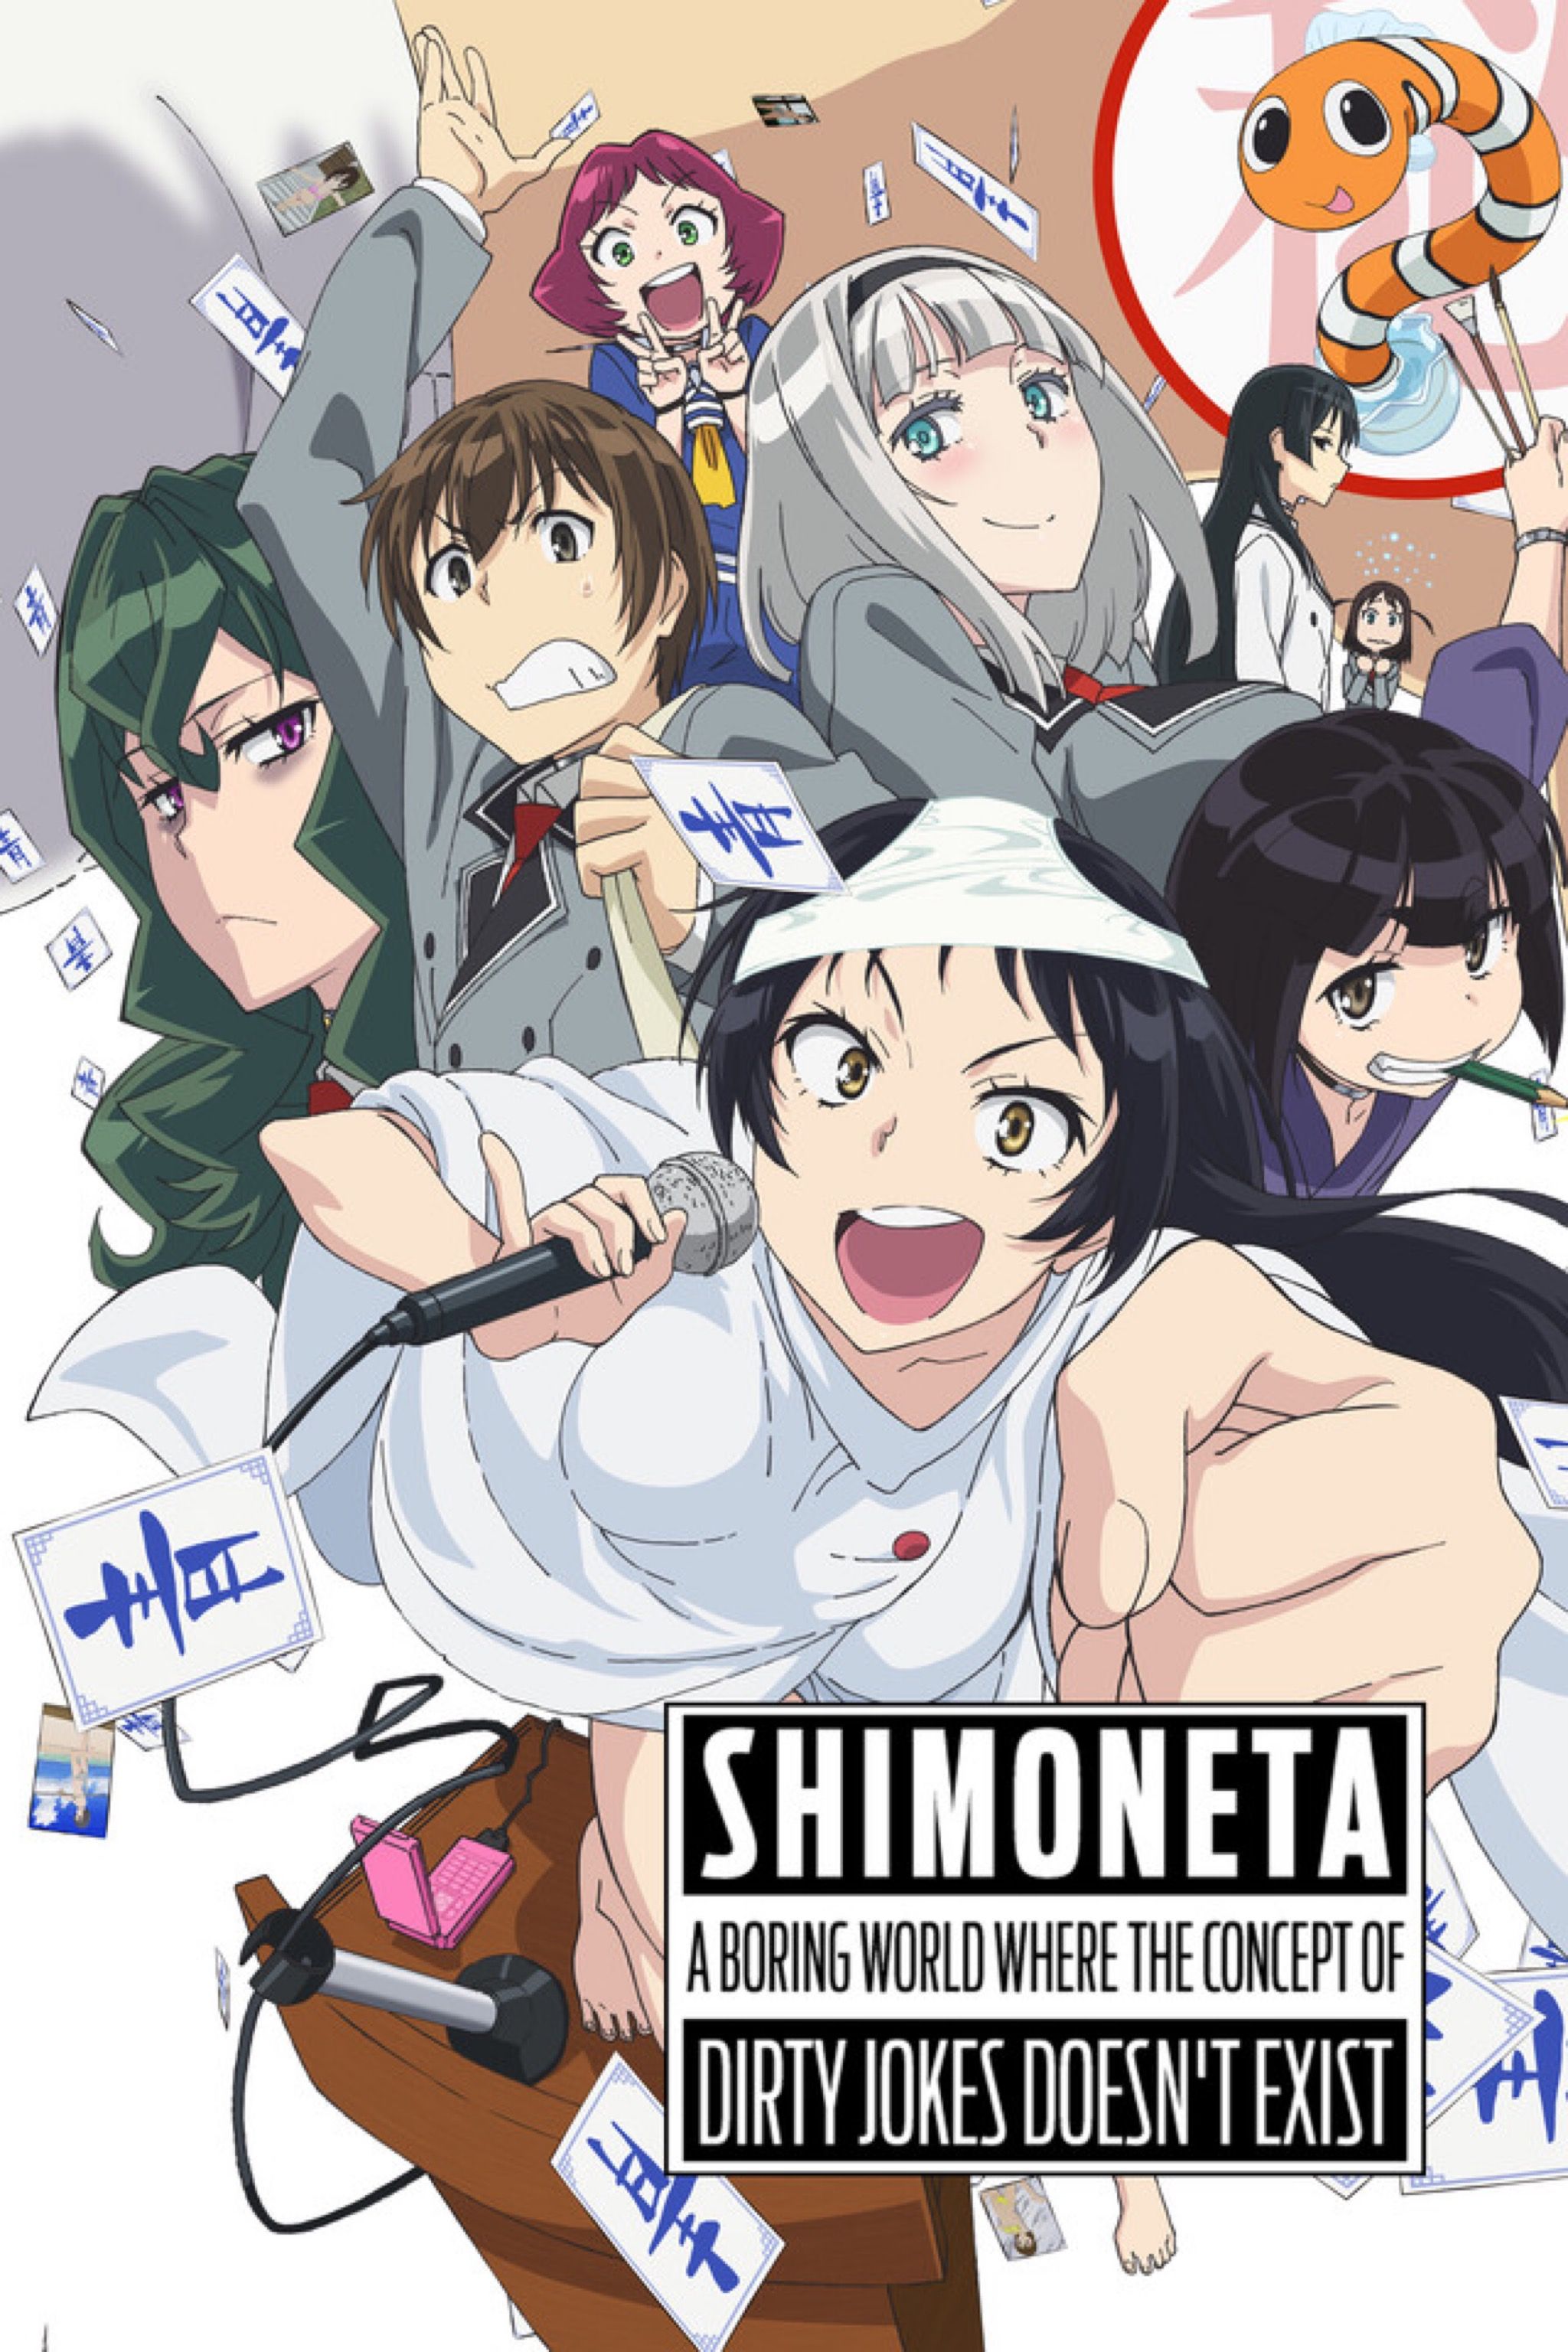 Shimoneta main cast on a poster for the series